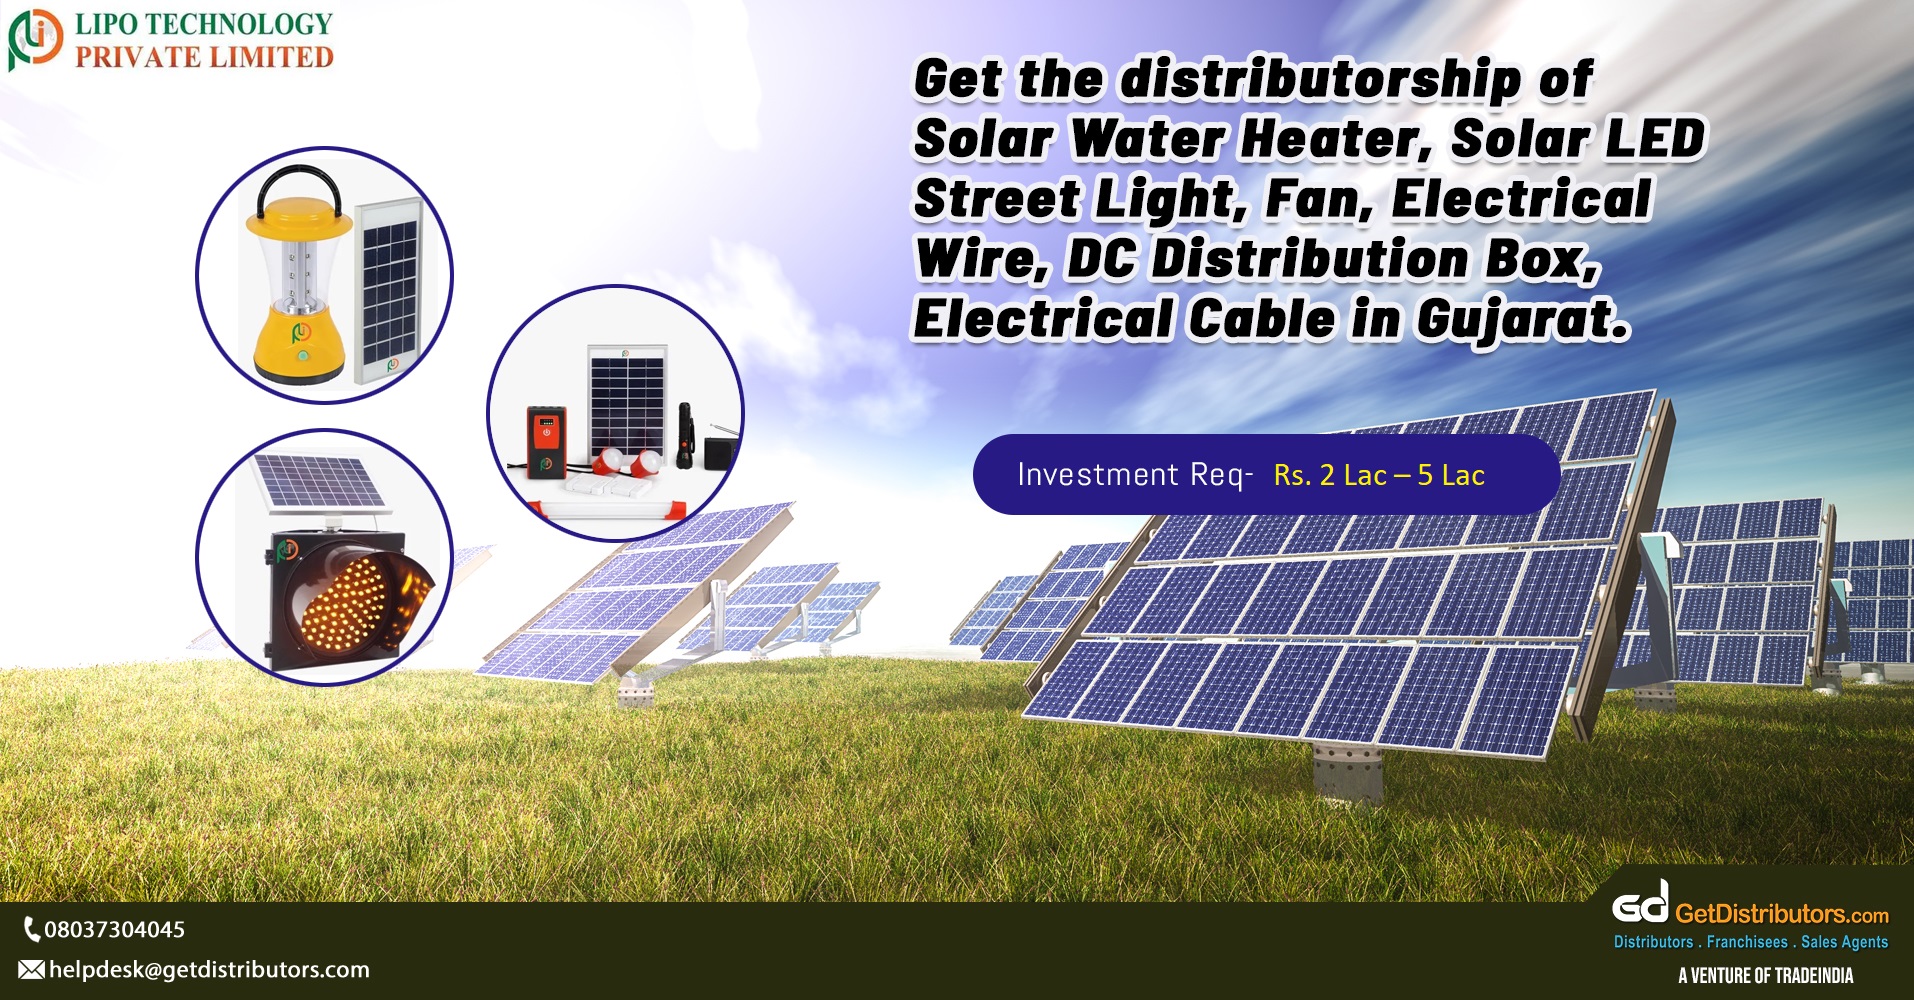 High-class and eco-friendly solar products for distribution